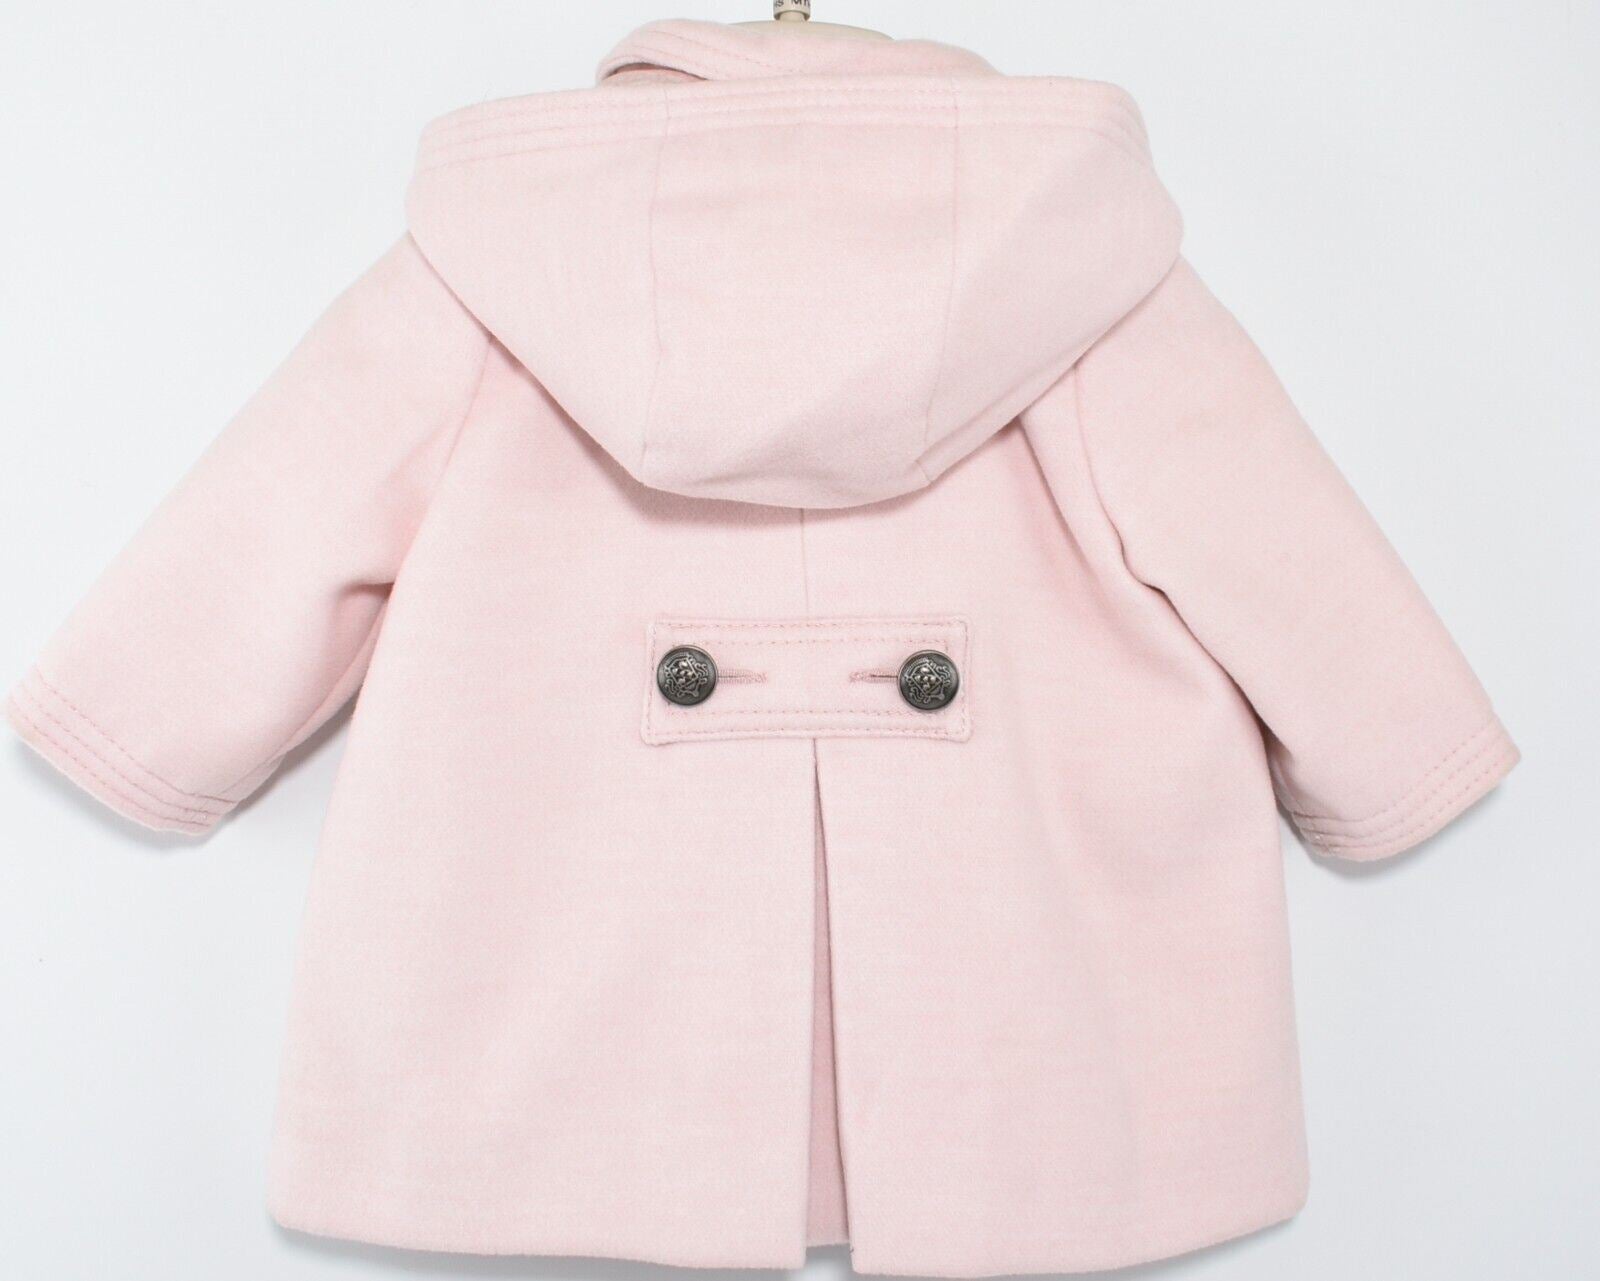 NEXT Baby Girls Hooded Coat, Light Pink, size 3-6 months